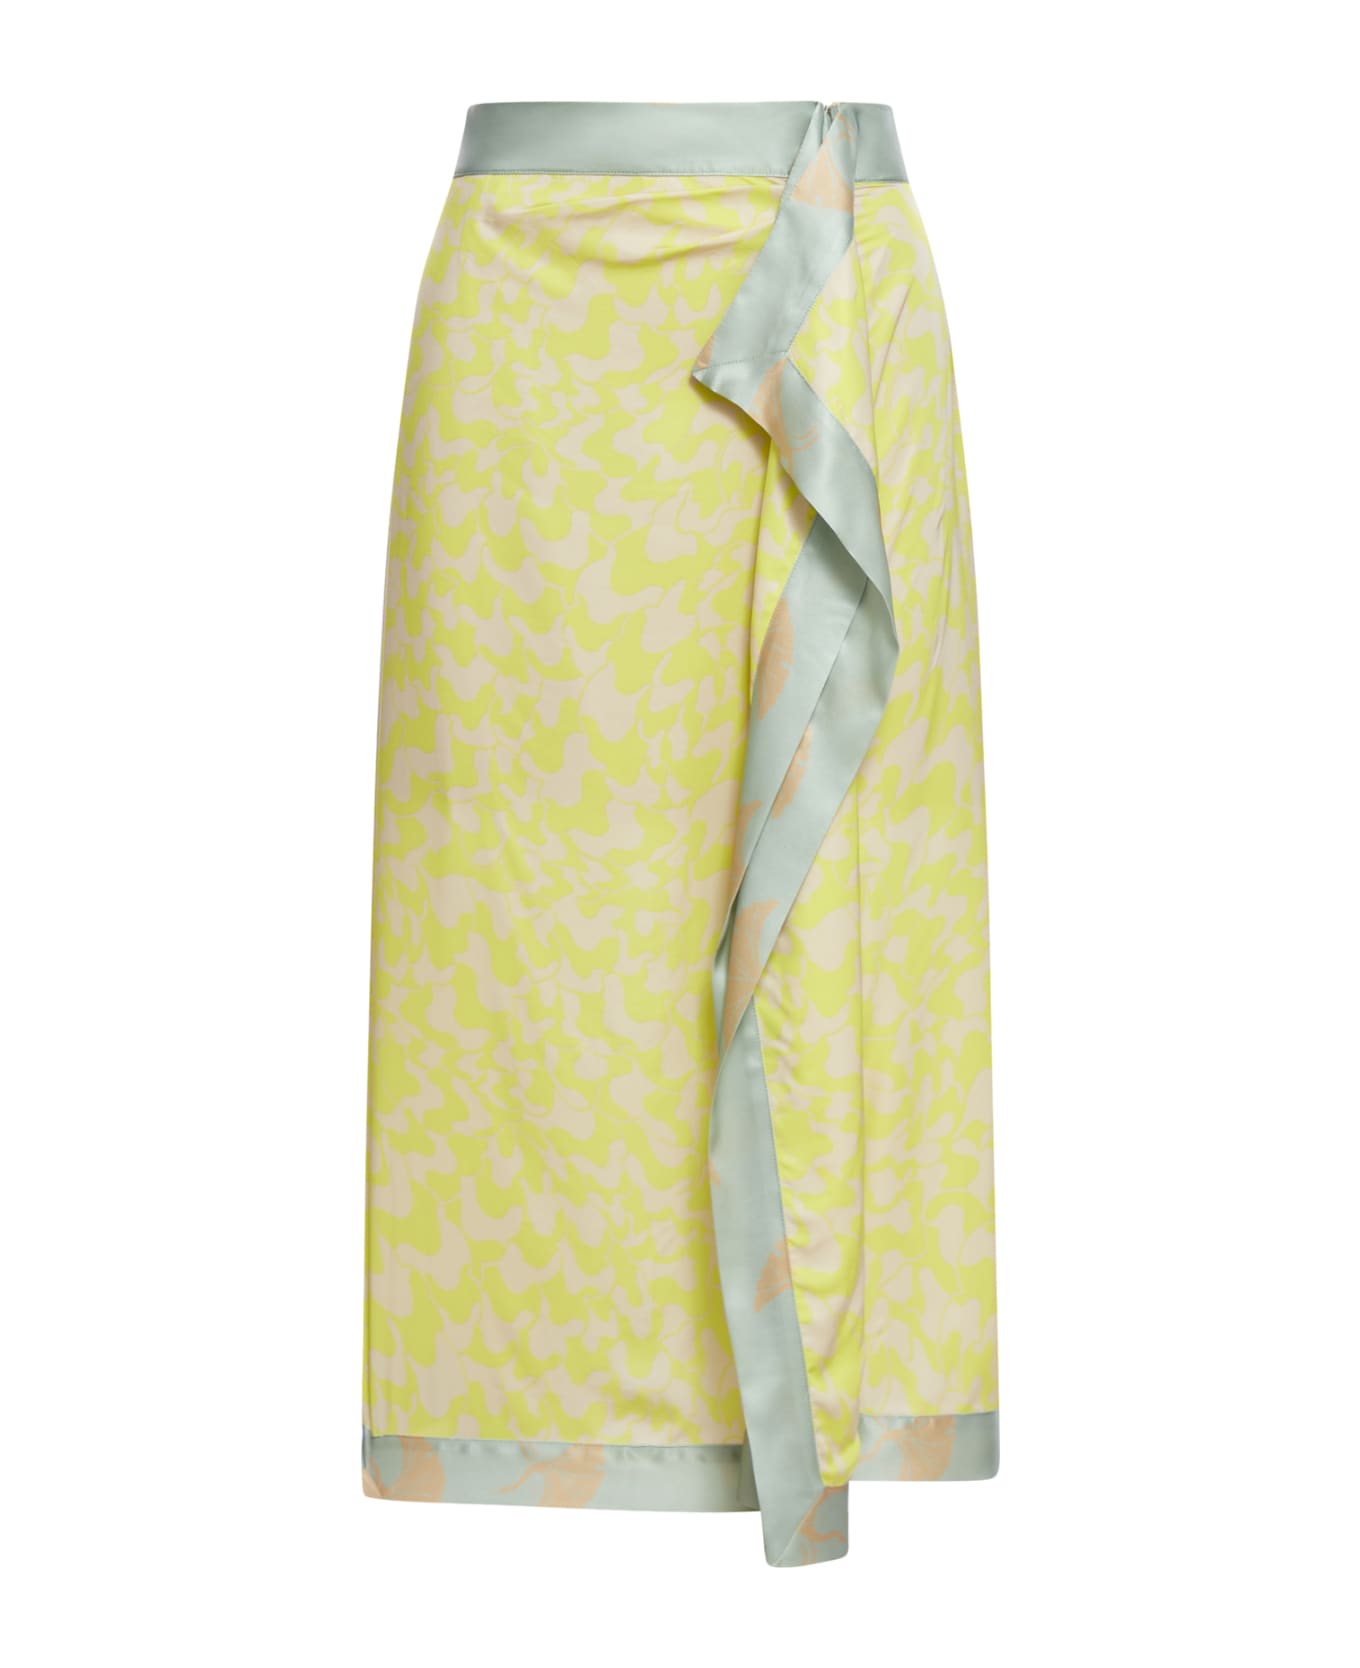 Dries Van Noten 01830-sole Bis 8104 W.w.skirt Lightweight Viscose Printed With Bicolor Abstract Pattern - Yellow スカート